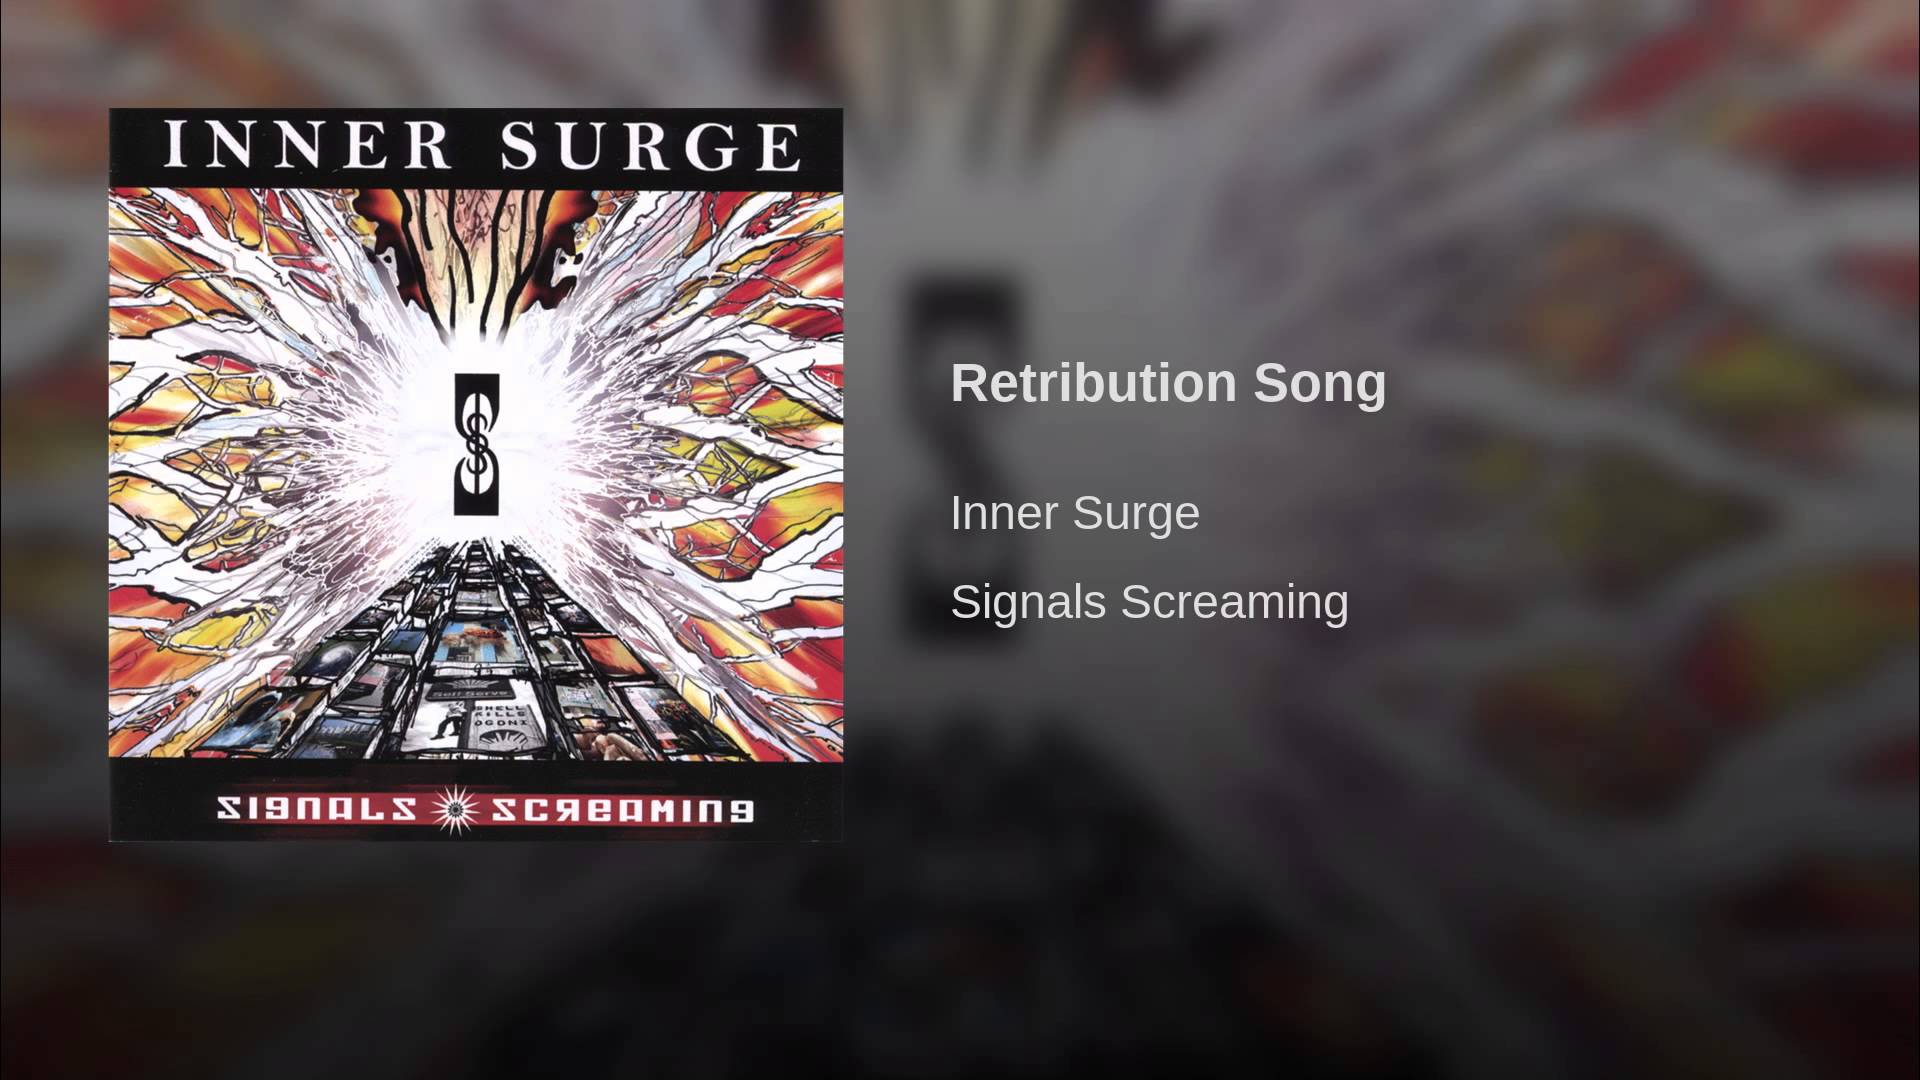 Signals Screaming by Inner Surge music